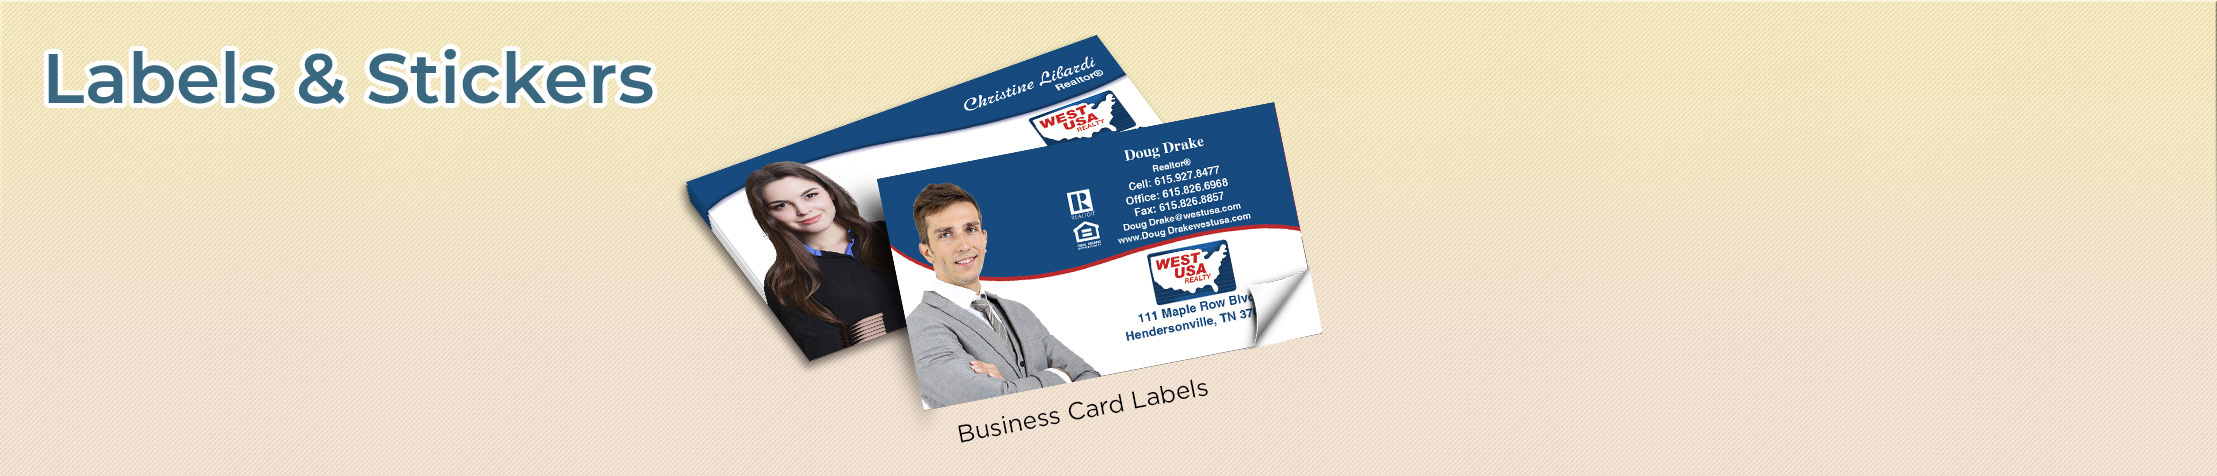 West USA Realty Real Estate Labels and Stickers - West USA Realty  business card labels, return address labels, shipping labels, and assorted stickers | BestPrintBuy.com